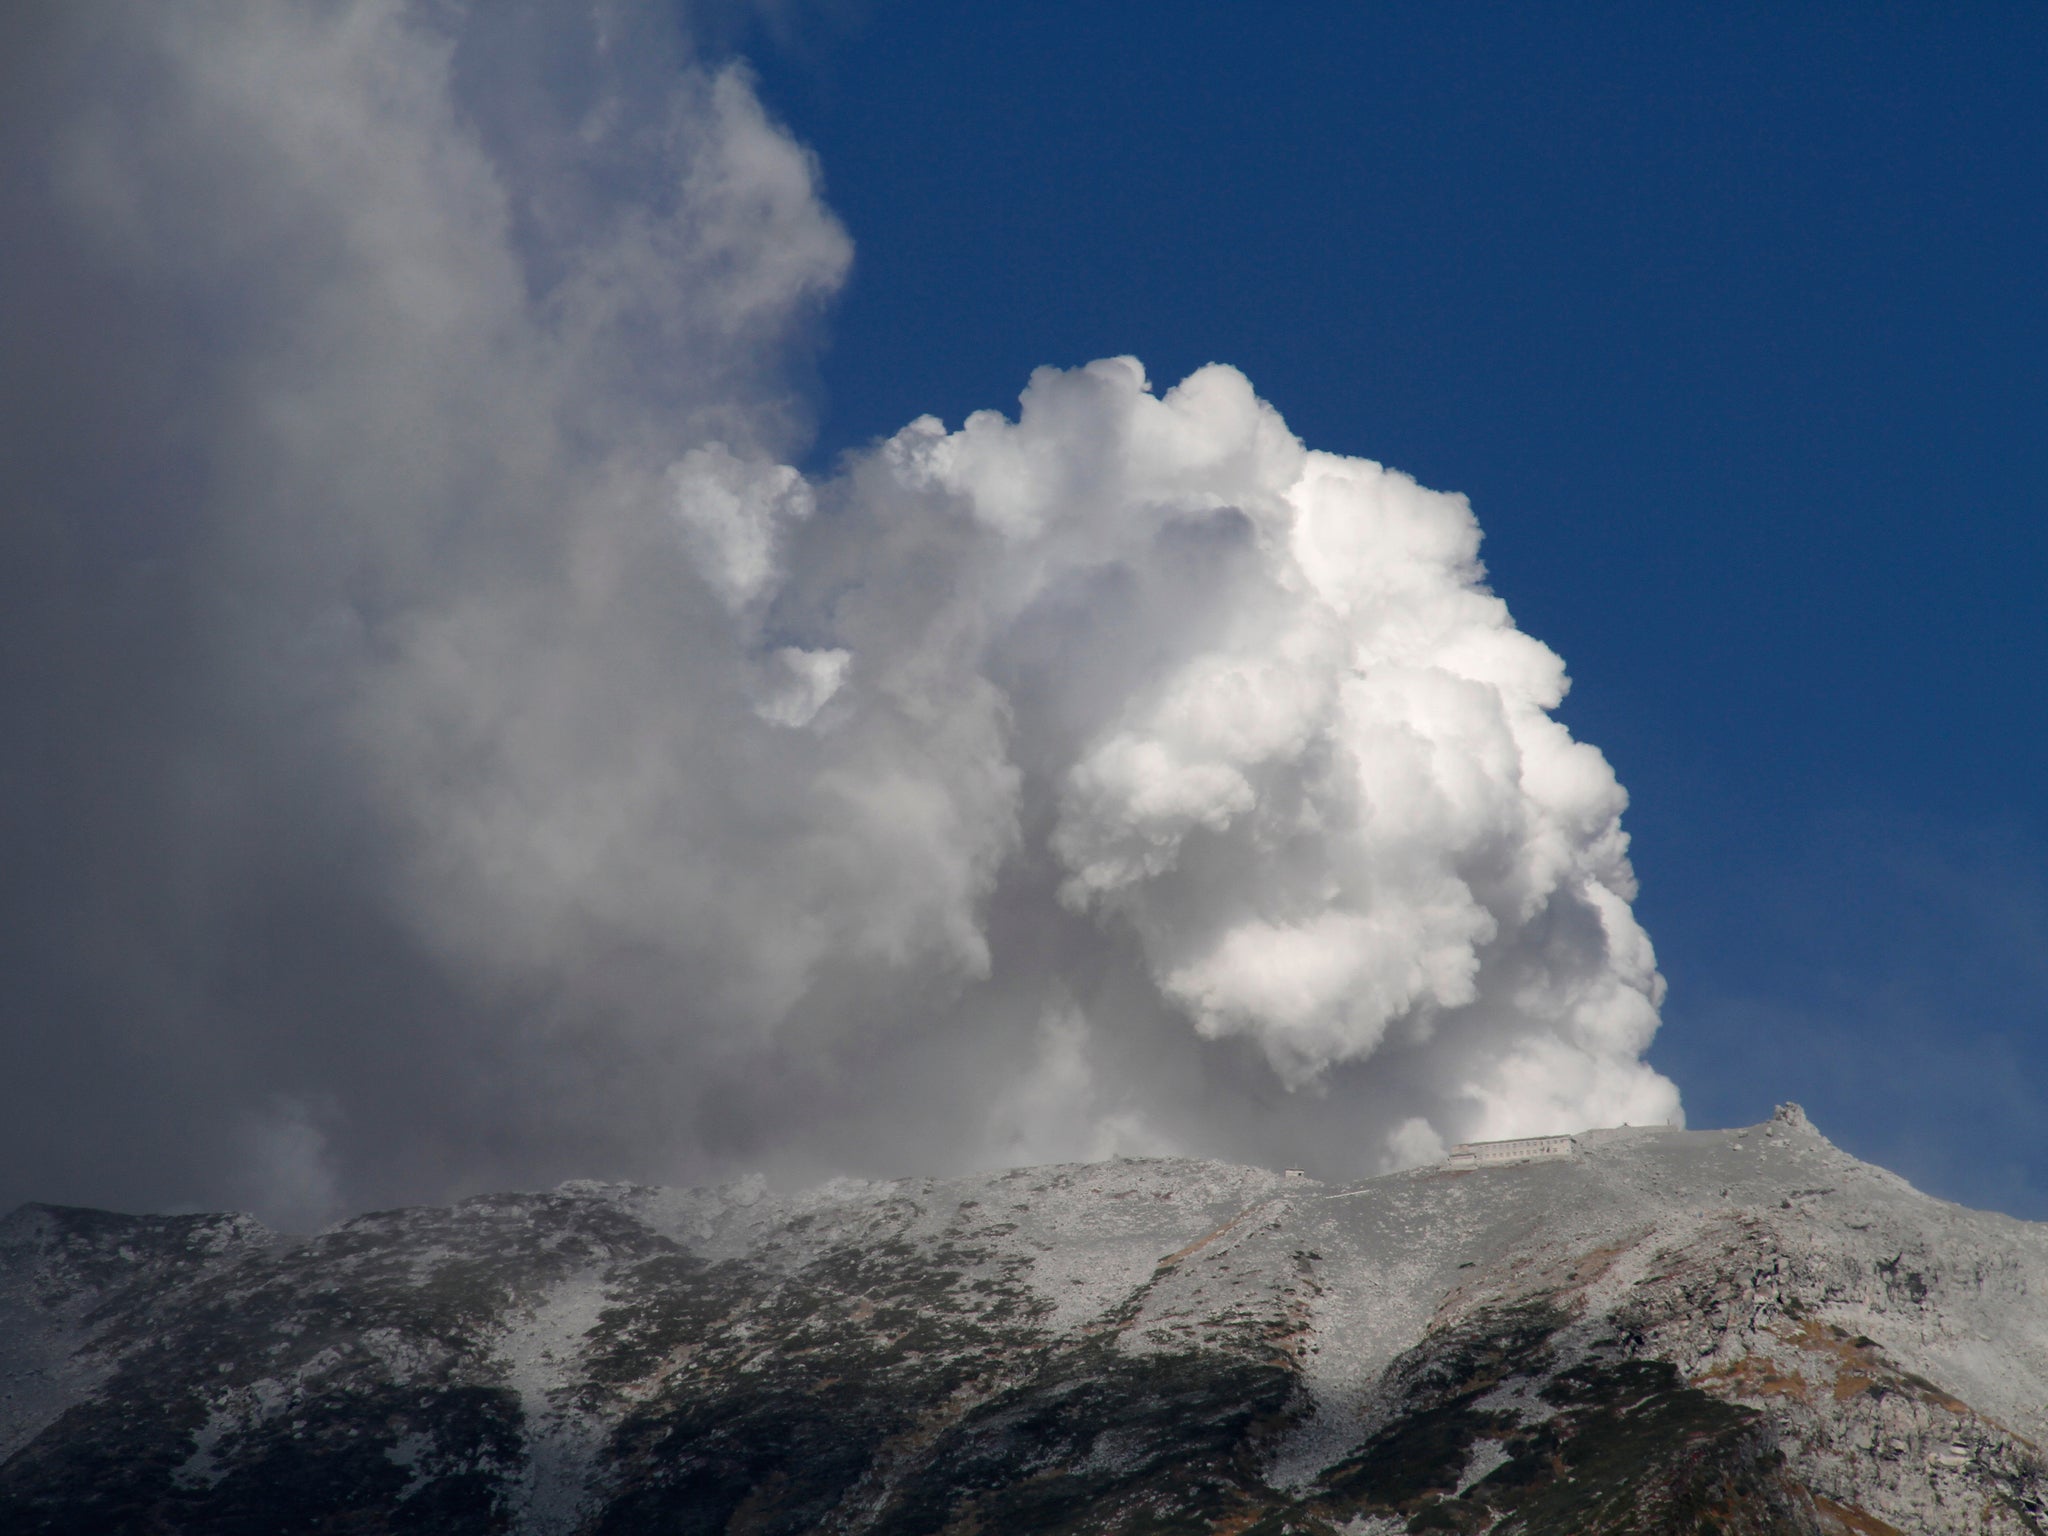 Plumes of smoke and ash billow from Mount Ontake as it continues to erupt in Otaki village, in Nagano prefecture, Japan